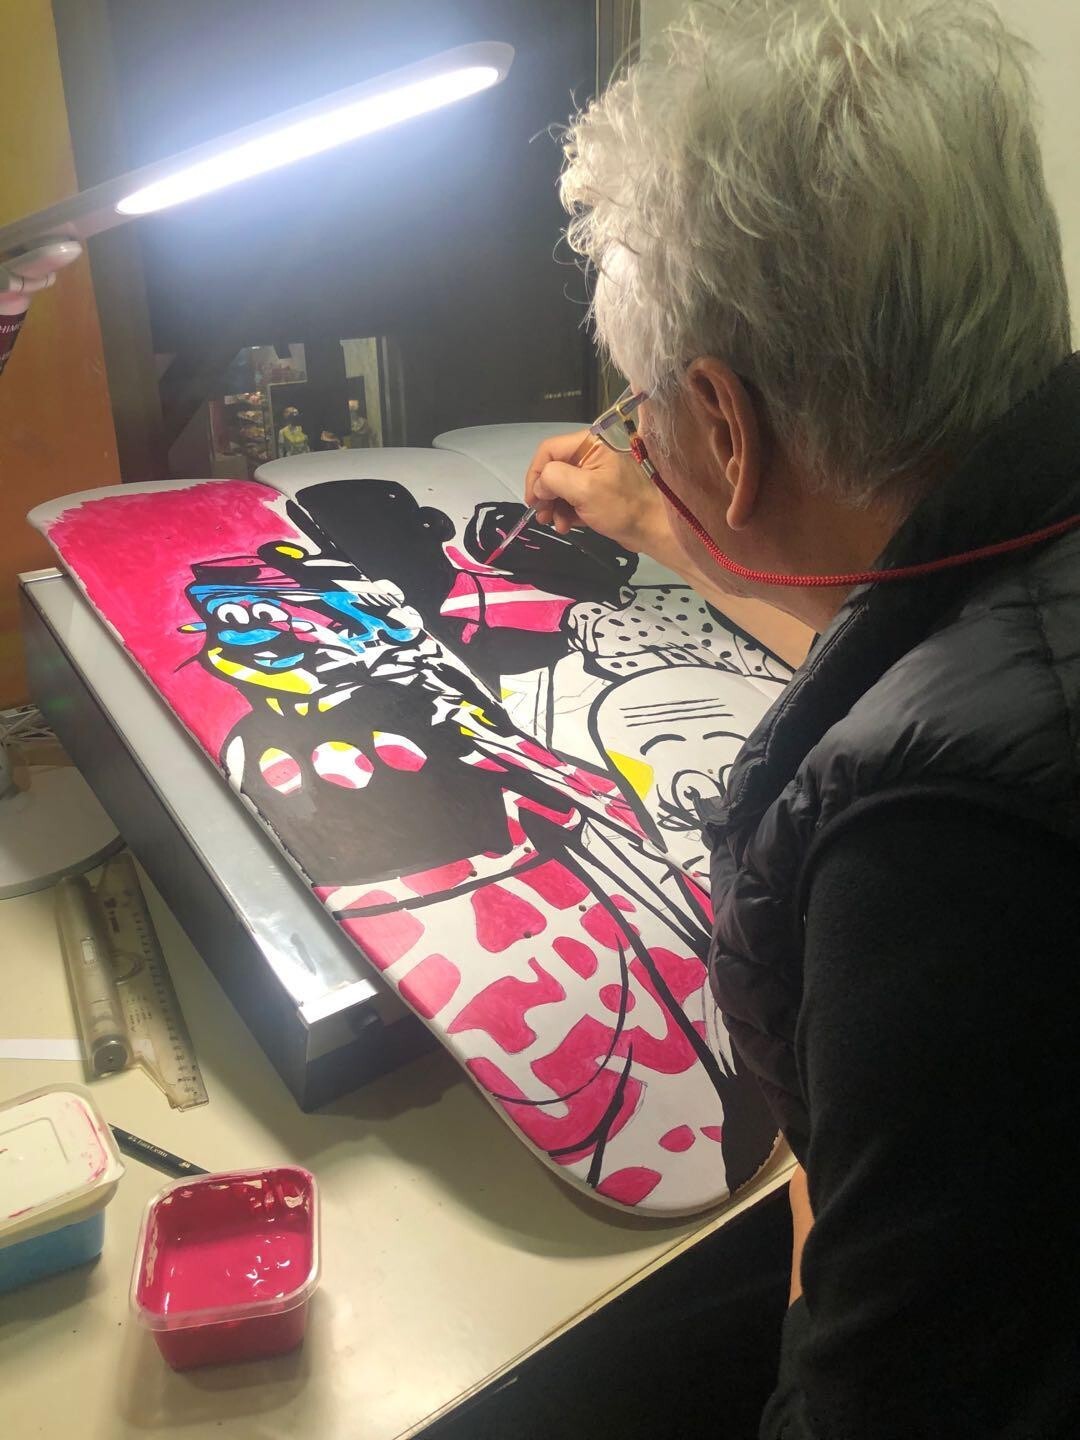 Joseph Wong decorates skateboard decks. To celebrate its 150th anniversary, the Tung Wah Group of Hospitals, in partnership with Sotheby’s auction house, is organising the Skateboard Deck Art Online Exhibition cum Charity Auction. Photo: TWGH/Sotheby’s/Joseph Wong